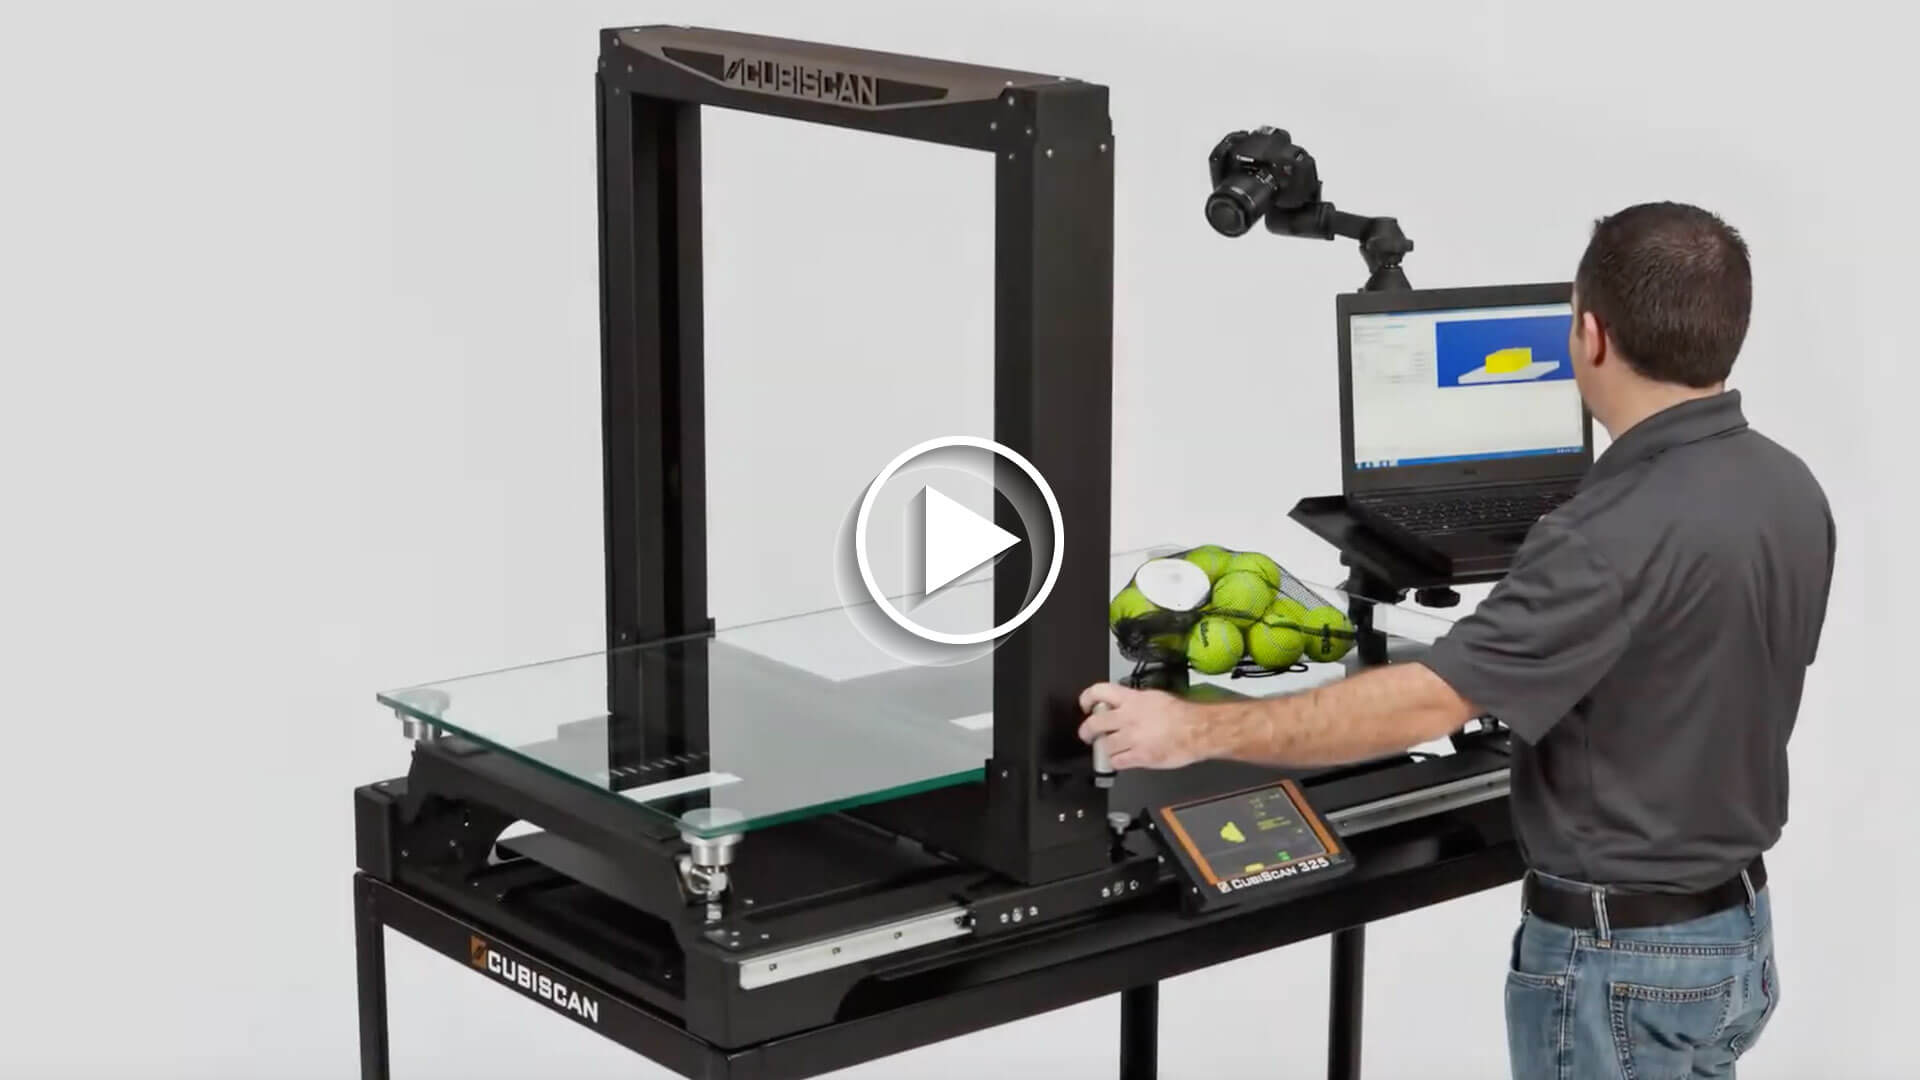 Automated inventory dimension weighing system for maximizing storage space efficiency video poster